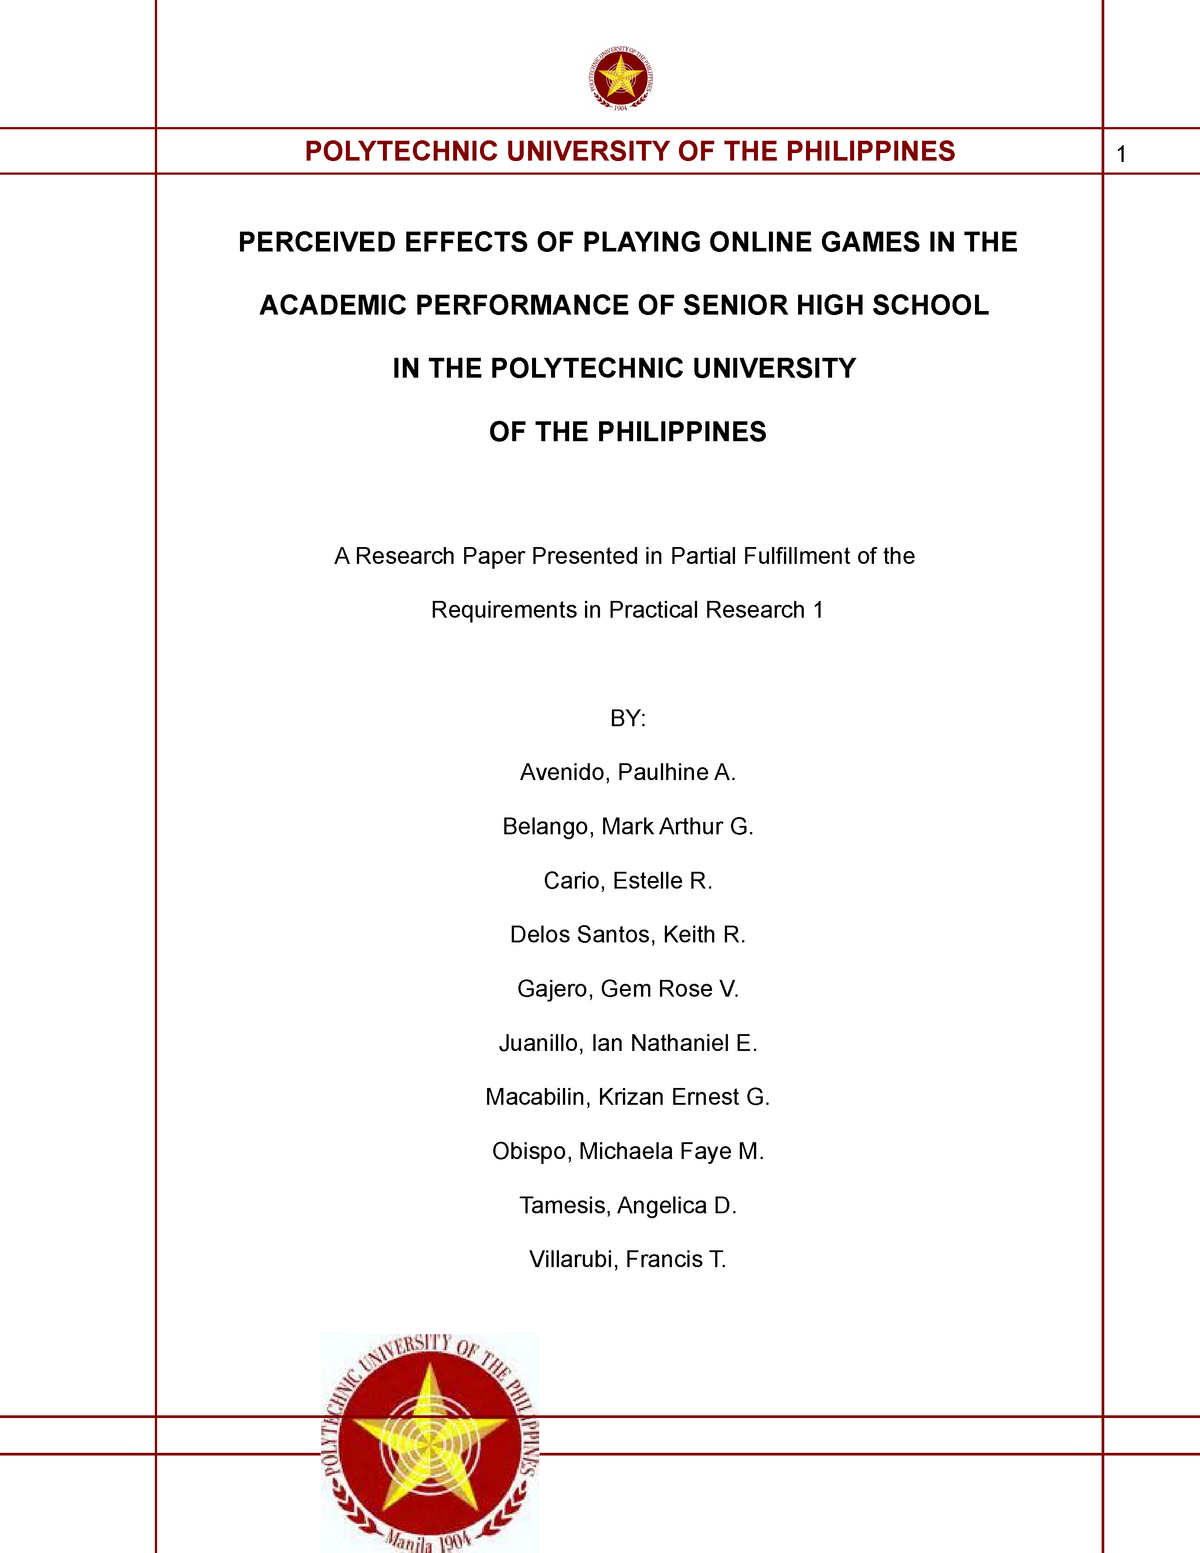 effects of playing online games research paper